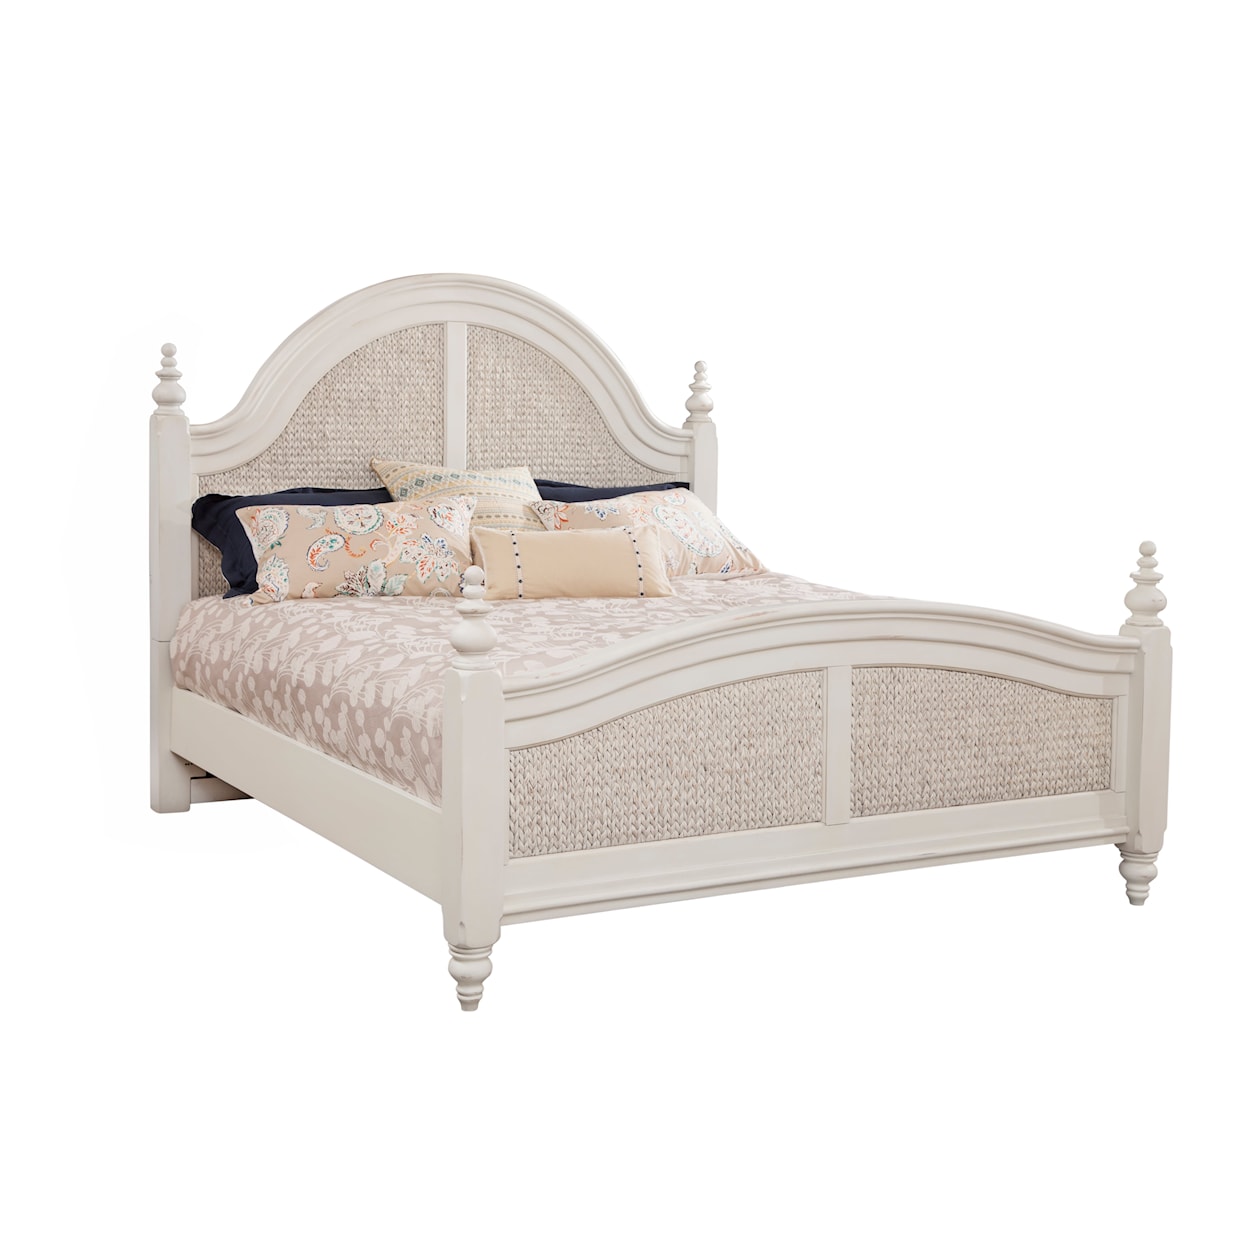 American Woodcrafters Rodanthe King Bed